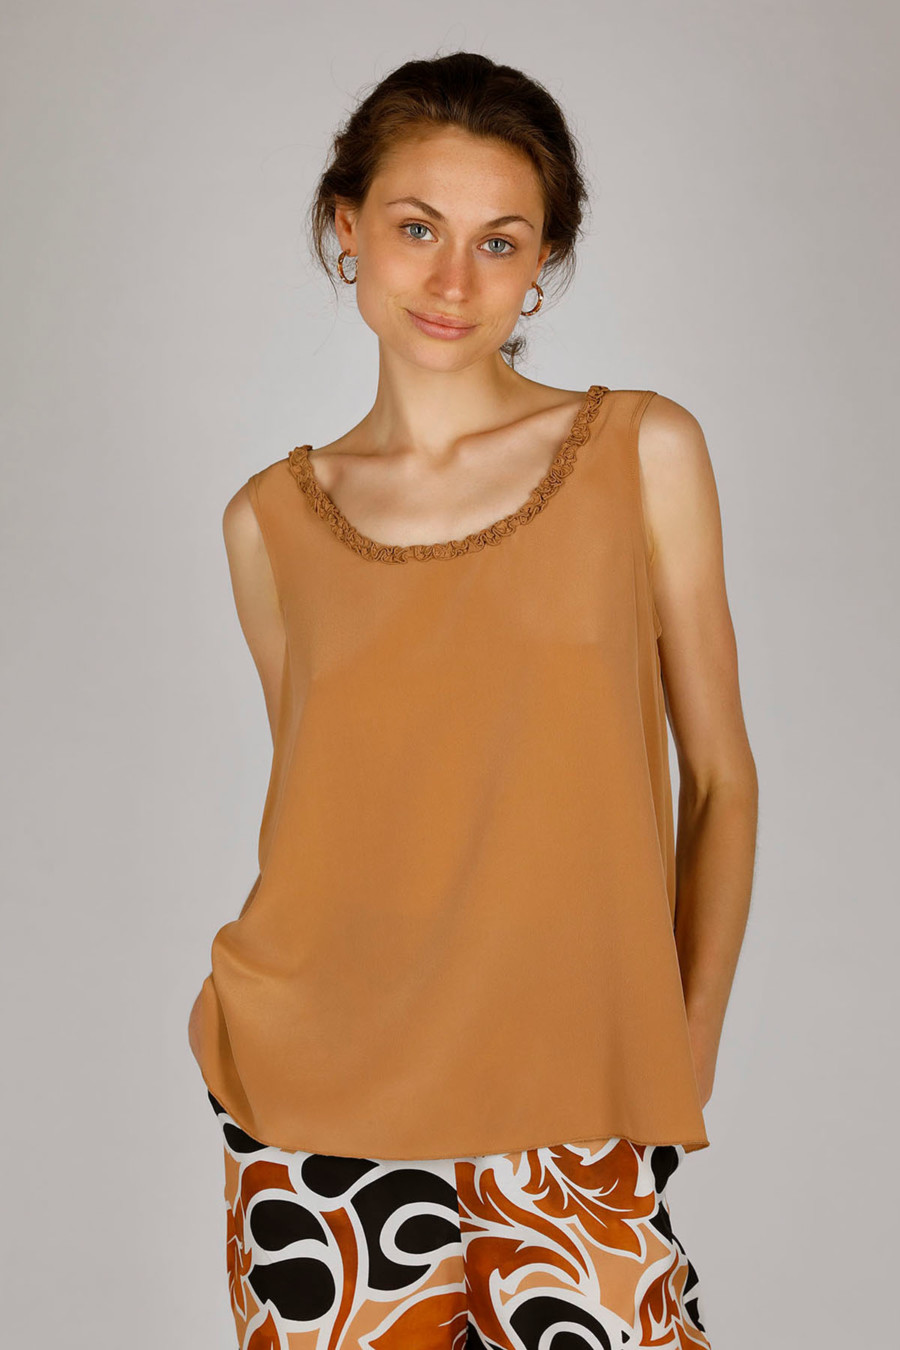 POLLY - Flowing top with ruffle details - Colour: Caramel